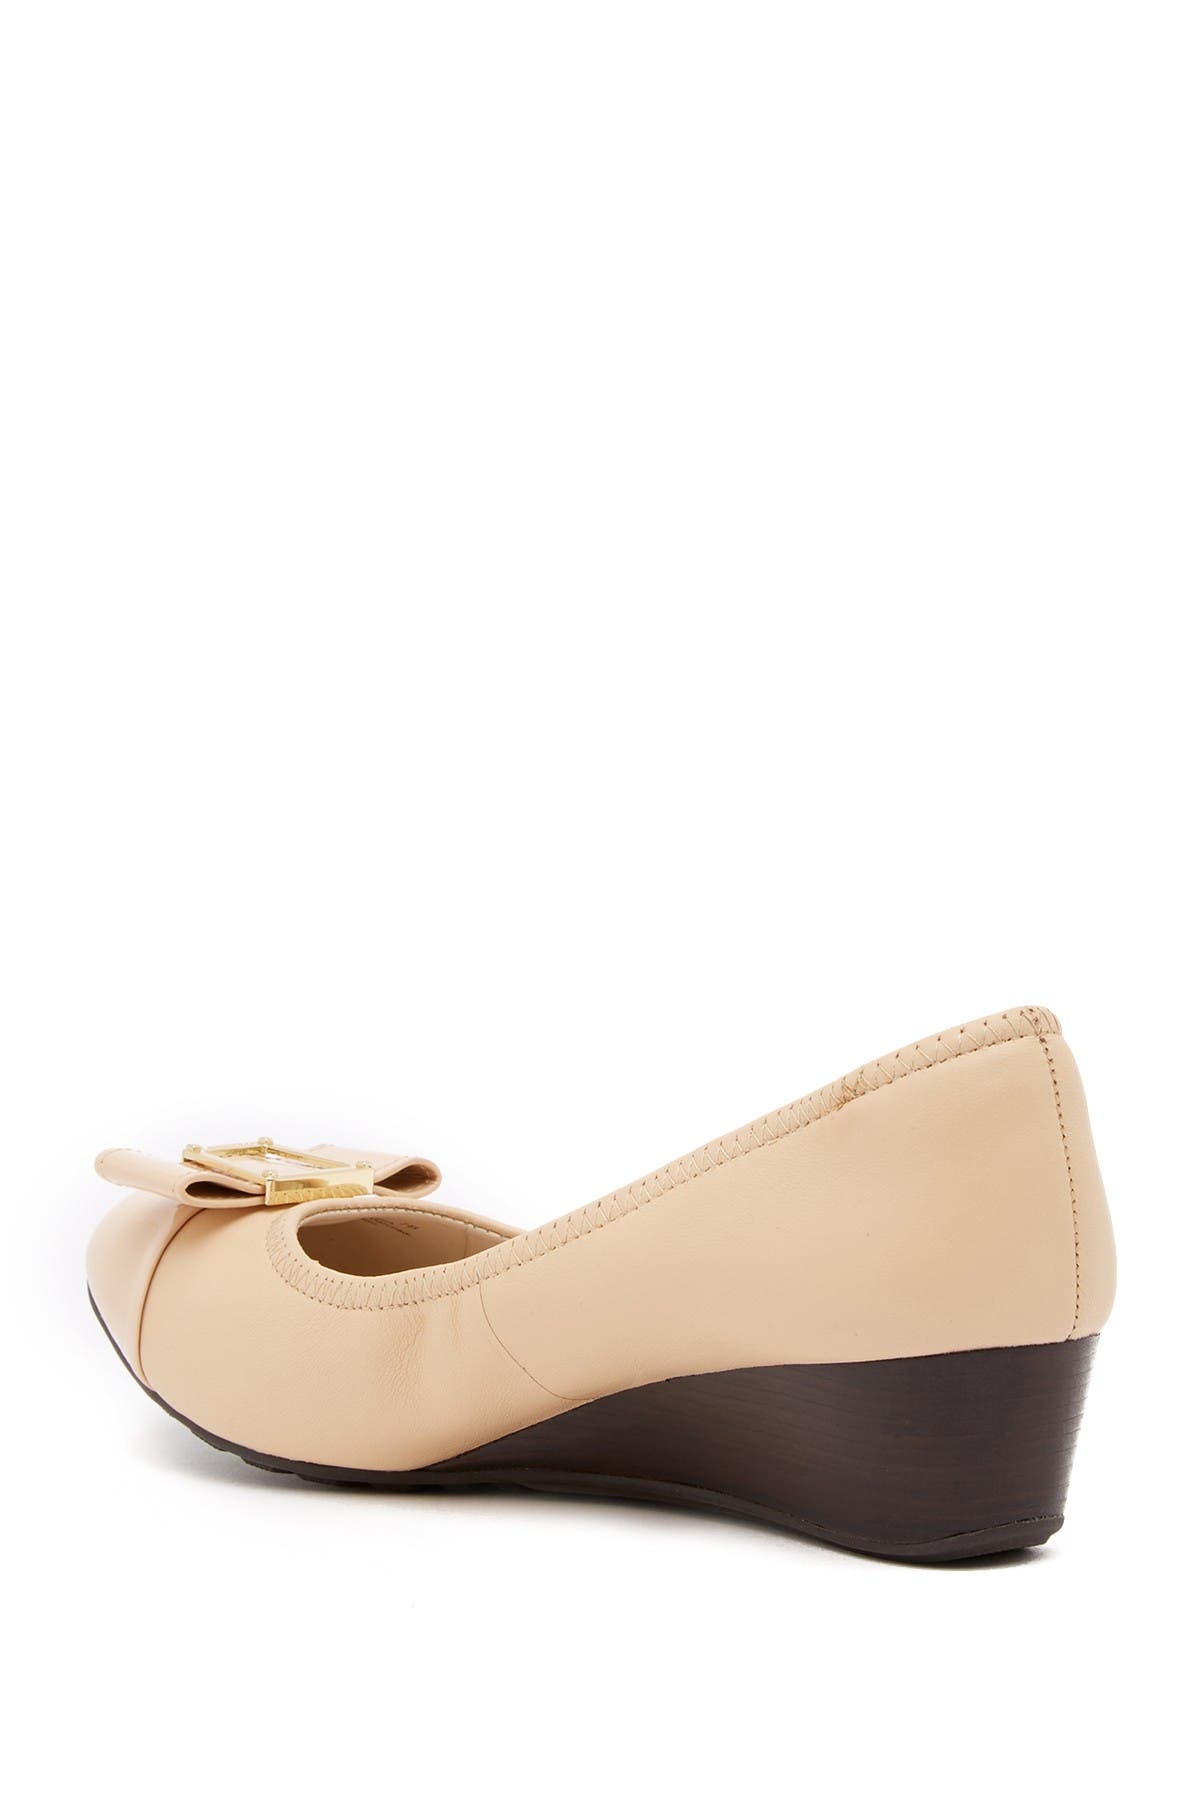 emory bow leather wedge pump